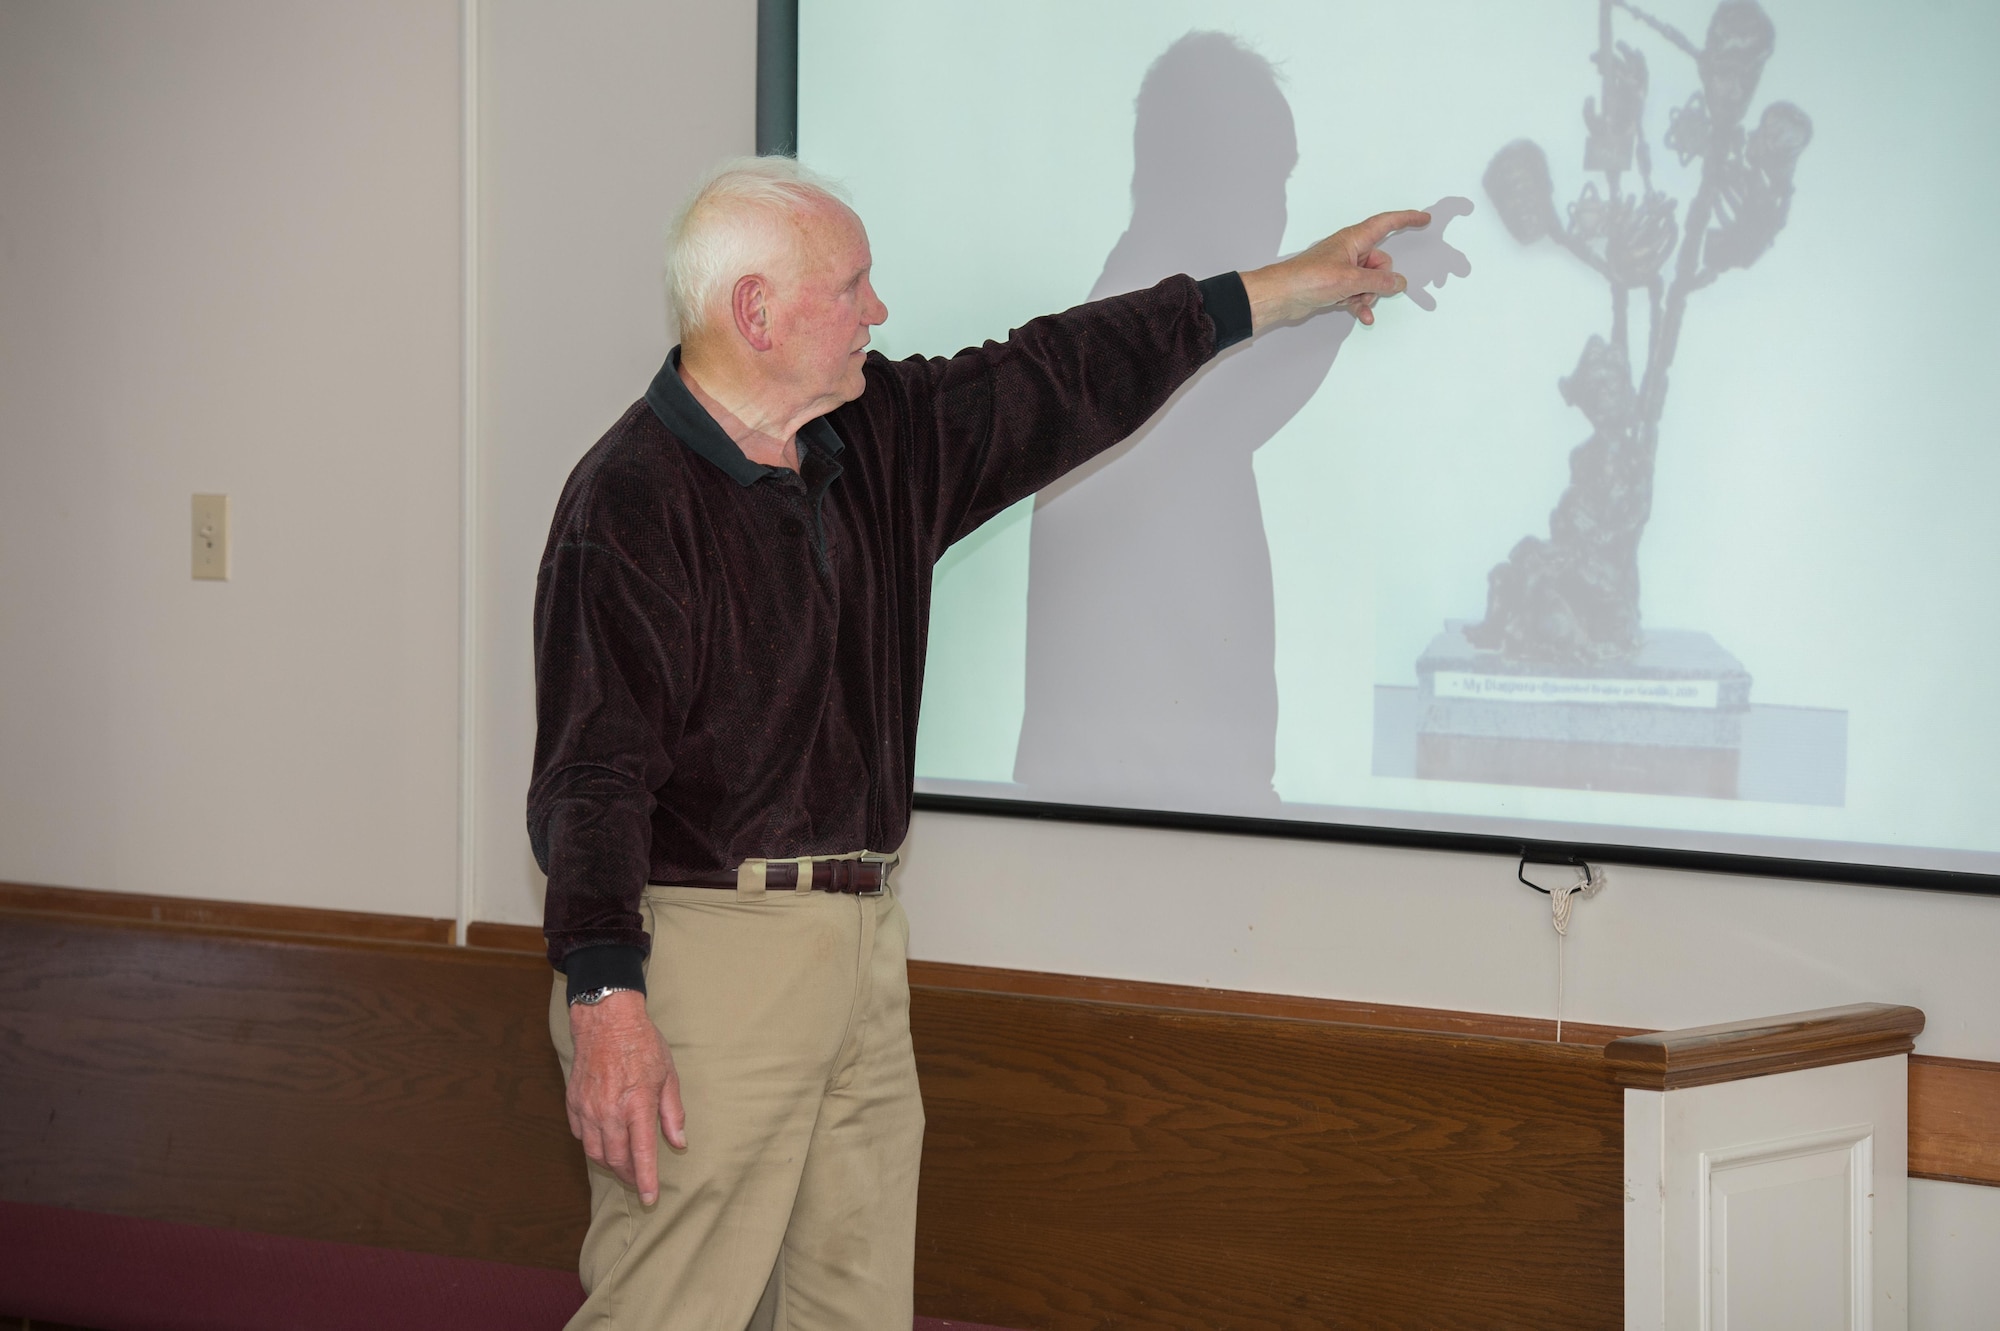 Fred Manasse, a Holocaust survivor, shows a photo of a sculpture he did to memorialize his family to approximately 50 attendees of his speech during Holocaust Remembrance Week at Hanscom Air Force Base, Massachusetts, April 24. Manasse is a retired systems engineer who is now active with national Holocaust survivors organizations, having survived seven years fleeing Nazi persecution in Europe from 1938-1945. (U.S. Air Force photo by Jerry Saslav)